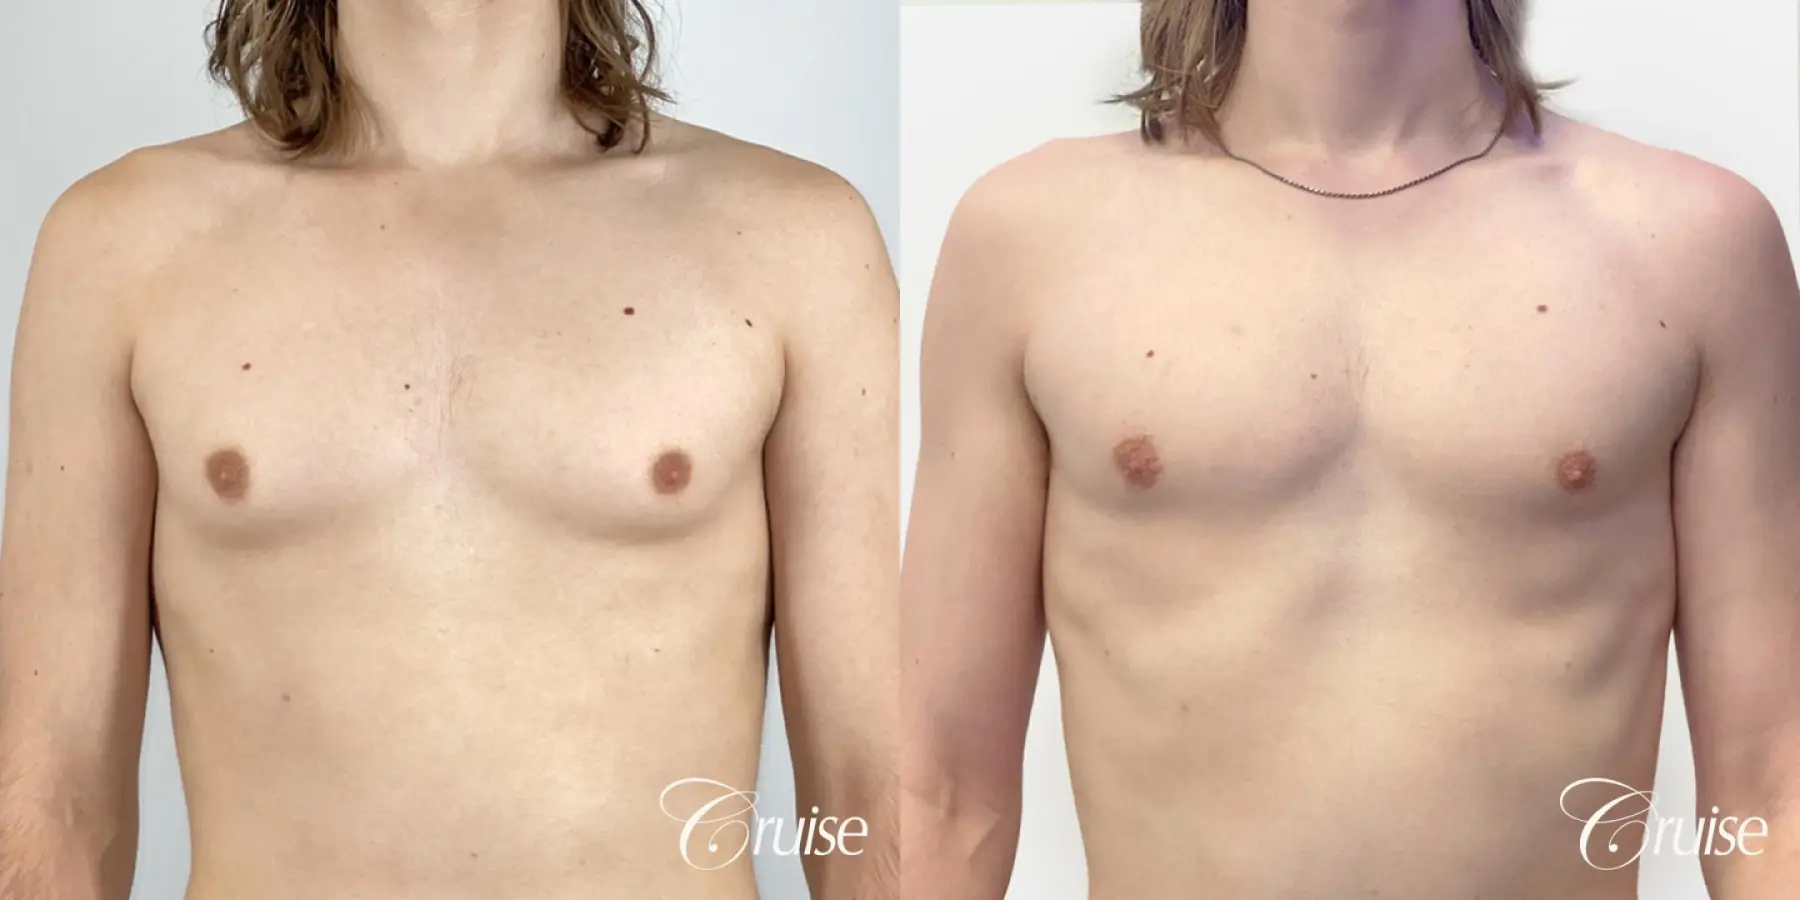 Type 1 Gynecomastia Removal - Before and After 1